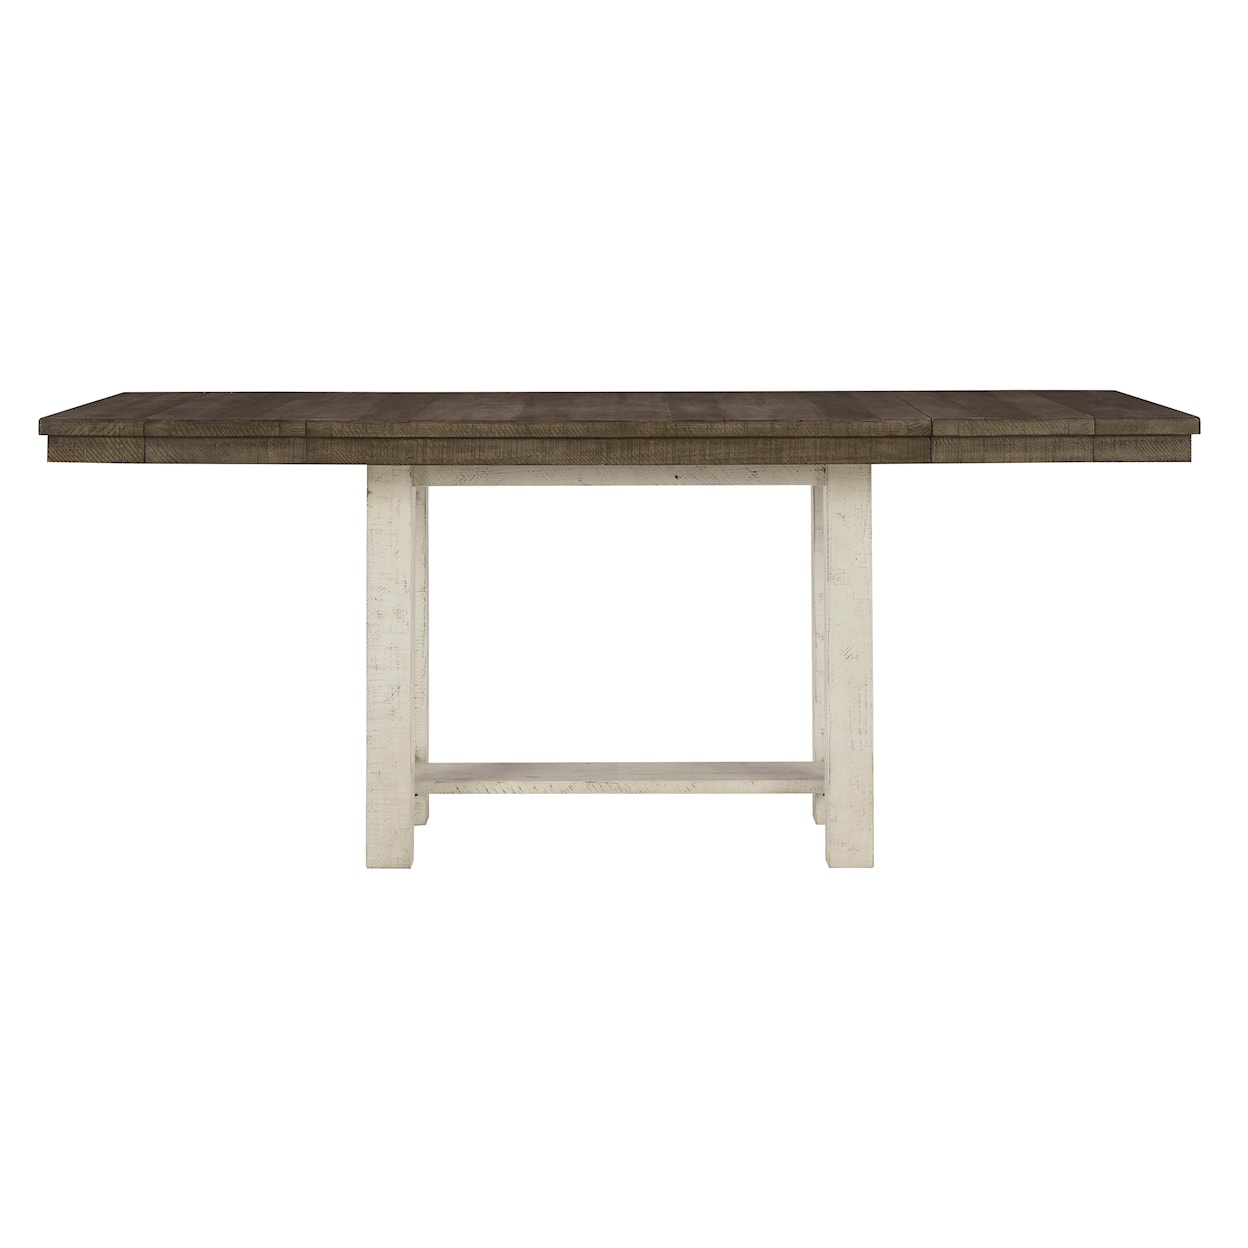 Benchcraft Brewgan Counter Height Dining Table